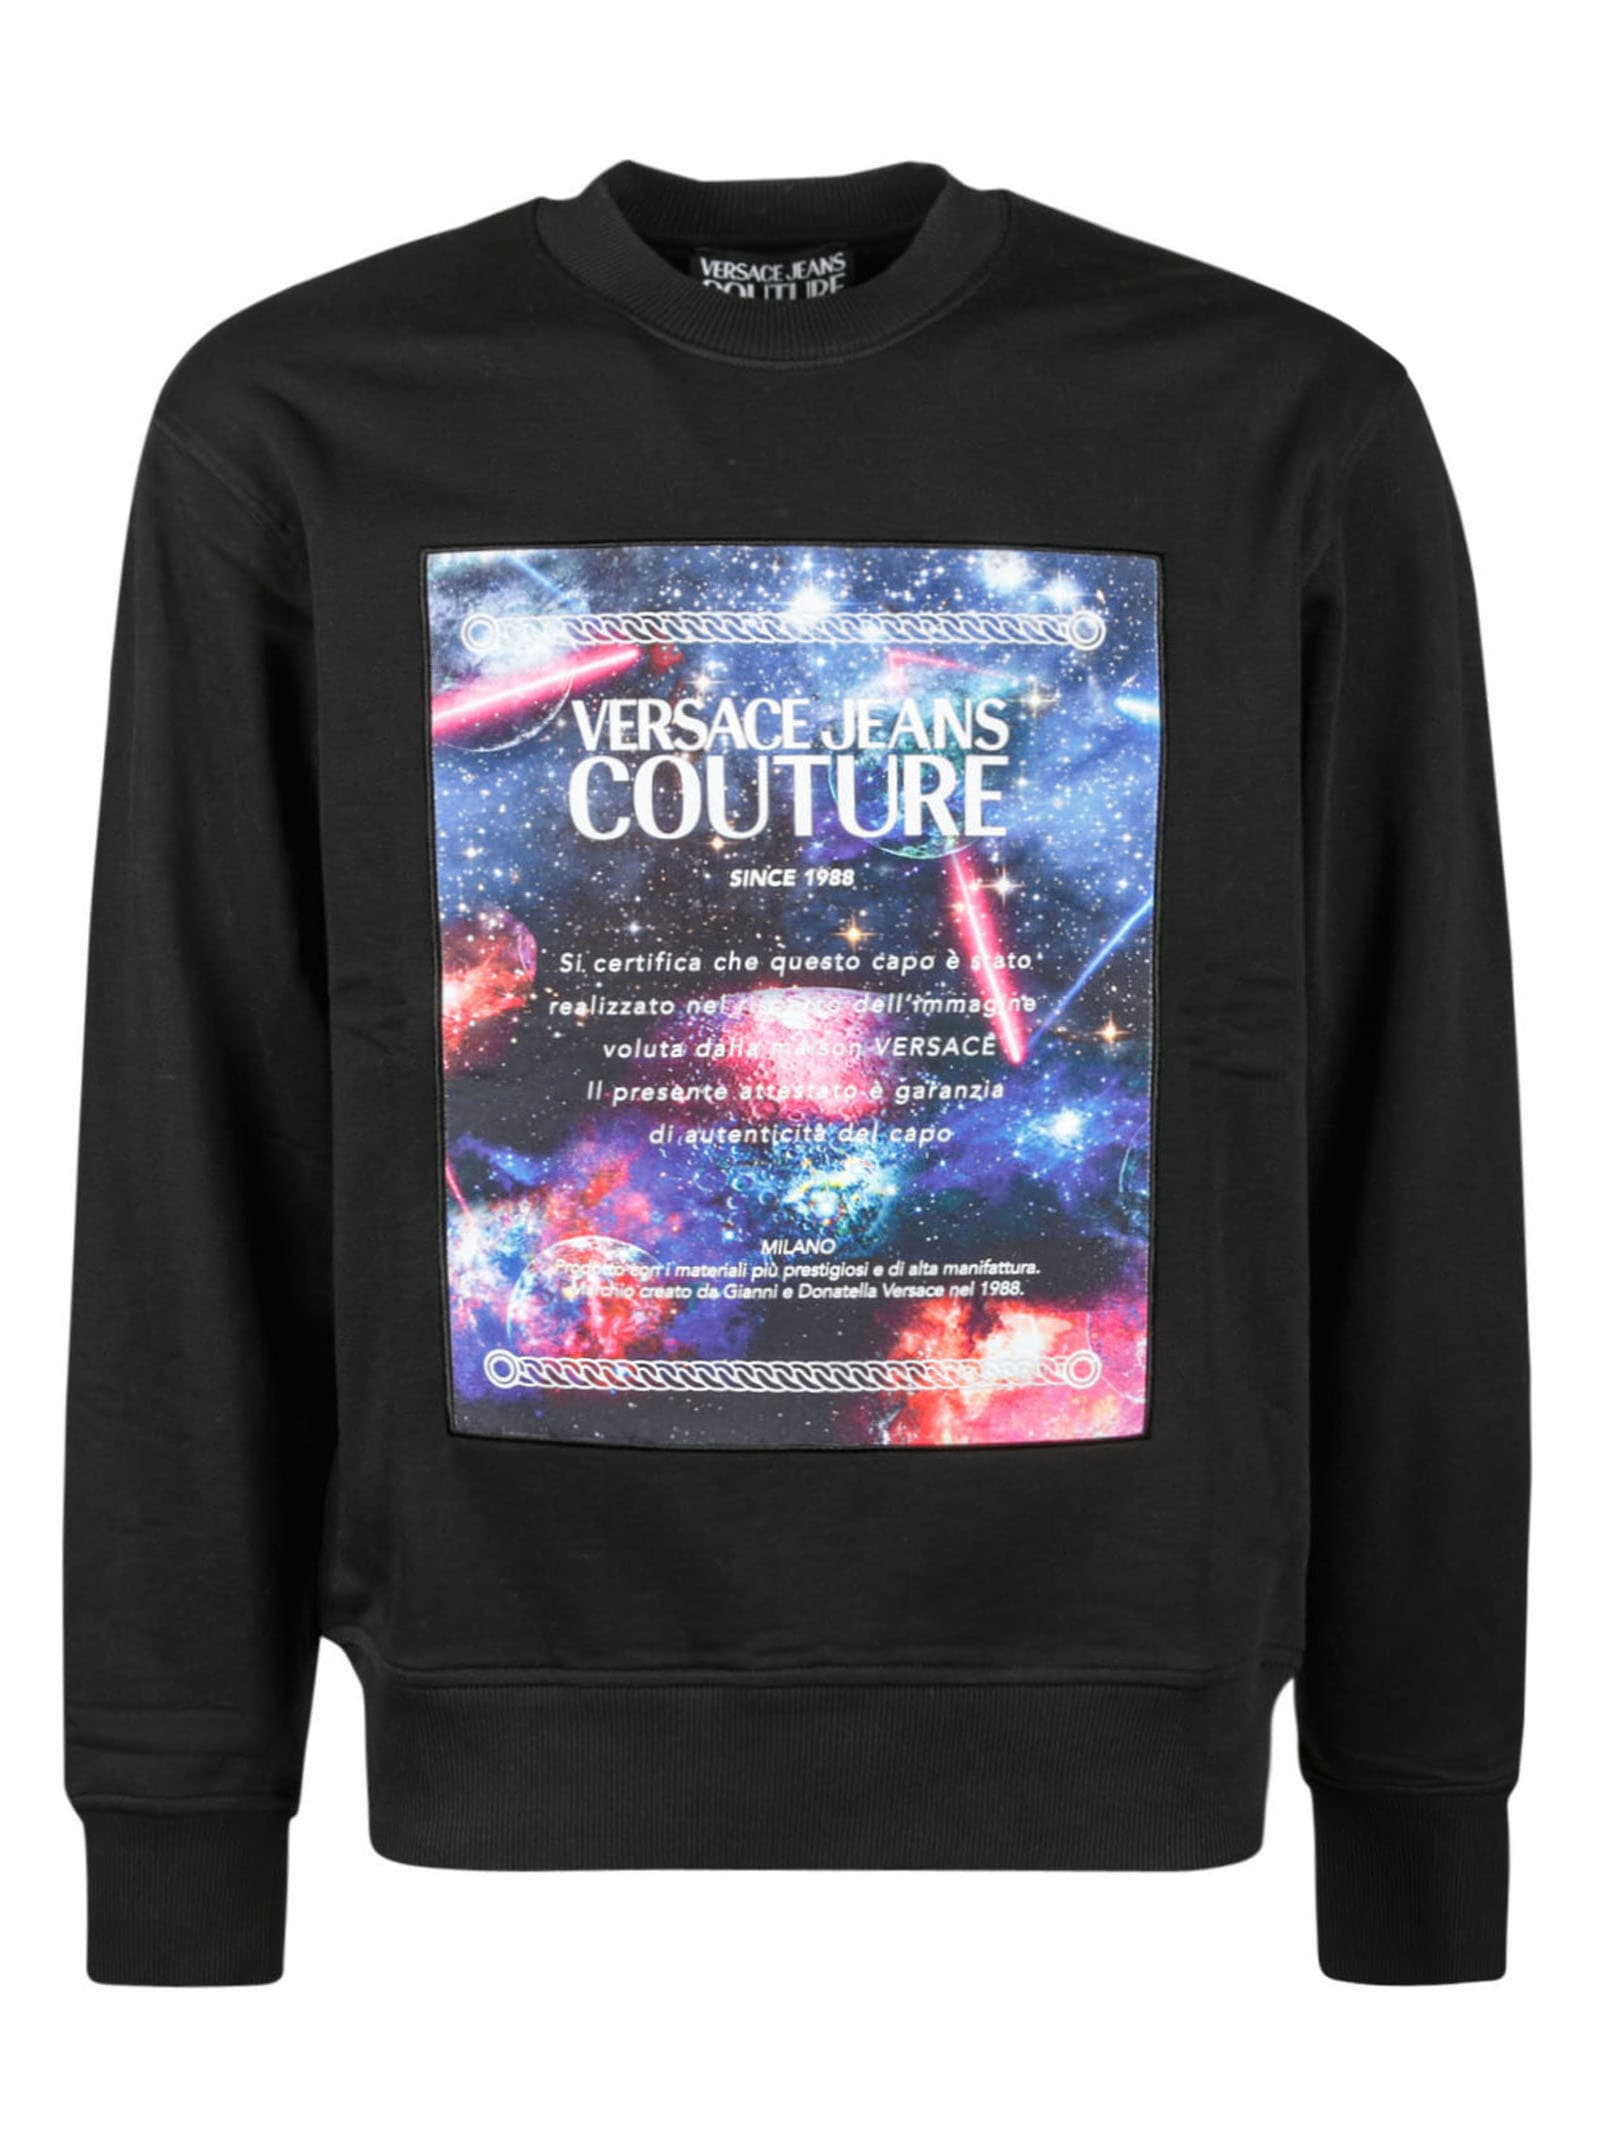 Versace Jeans Couture Brushed Sweatshirt